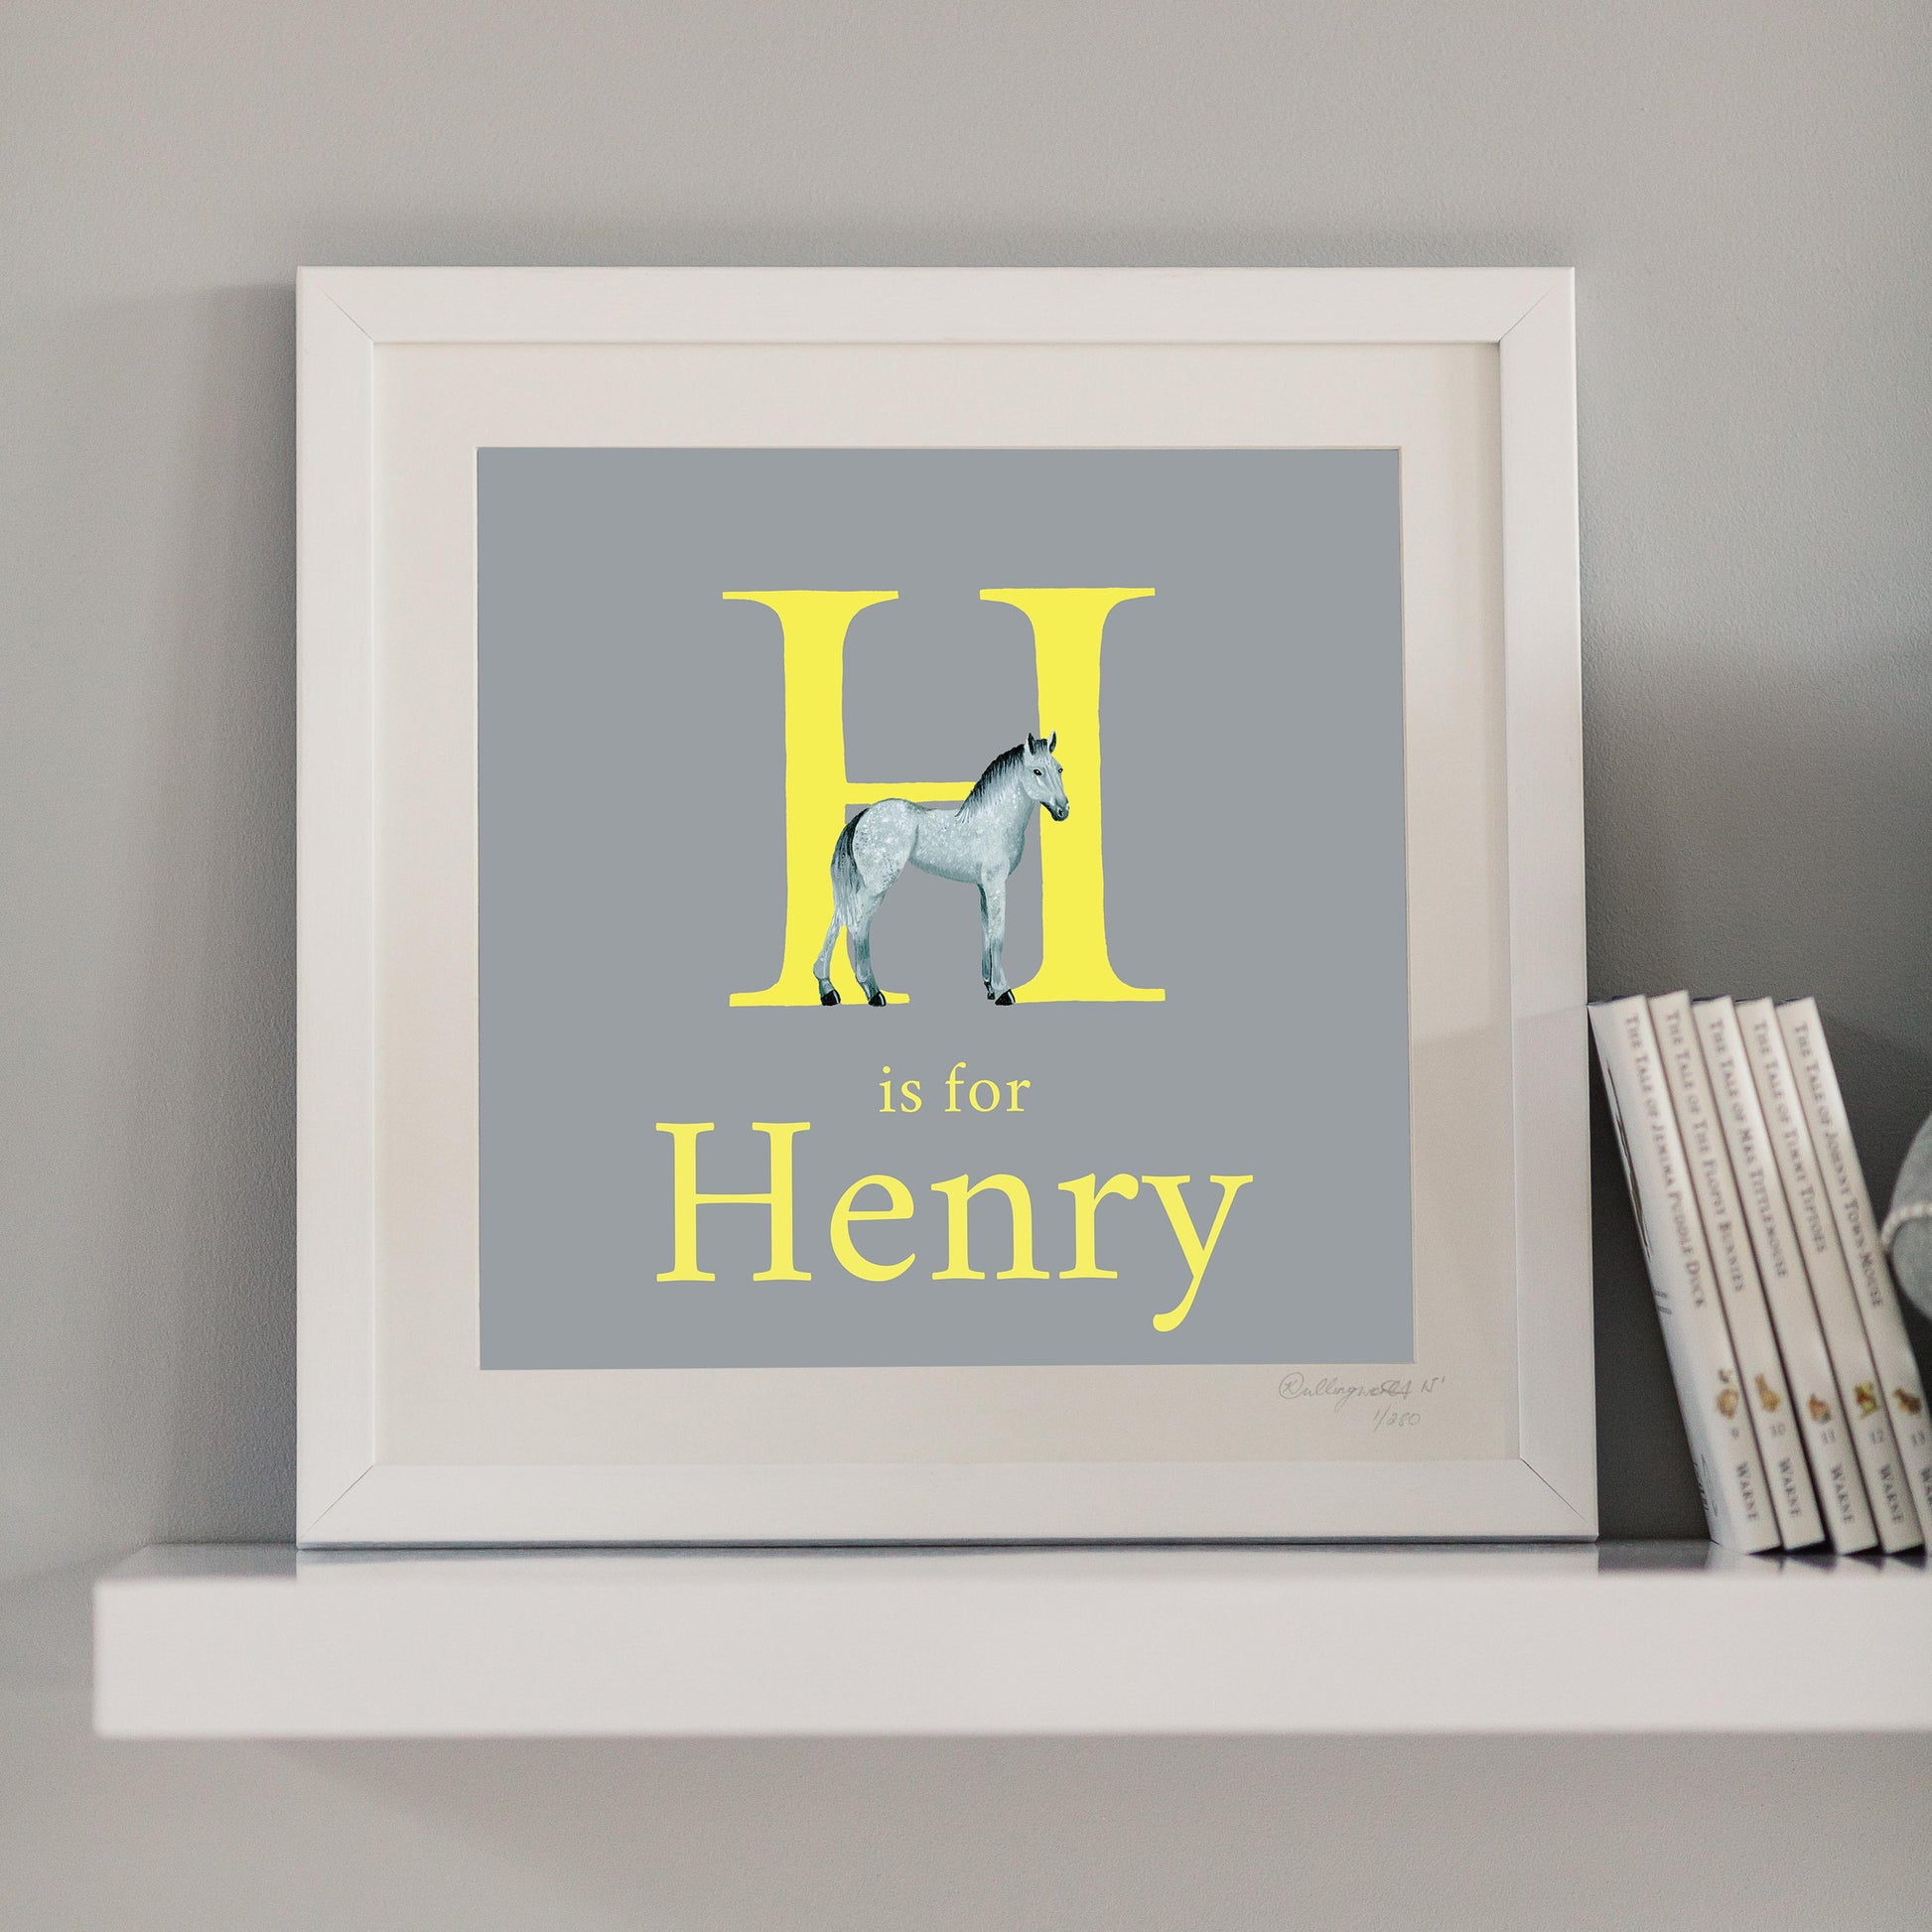 Framed H is for Horse and Henry personalised grey, yellow and white Letter print perfect gift